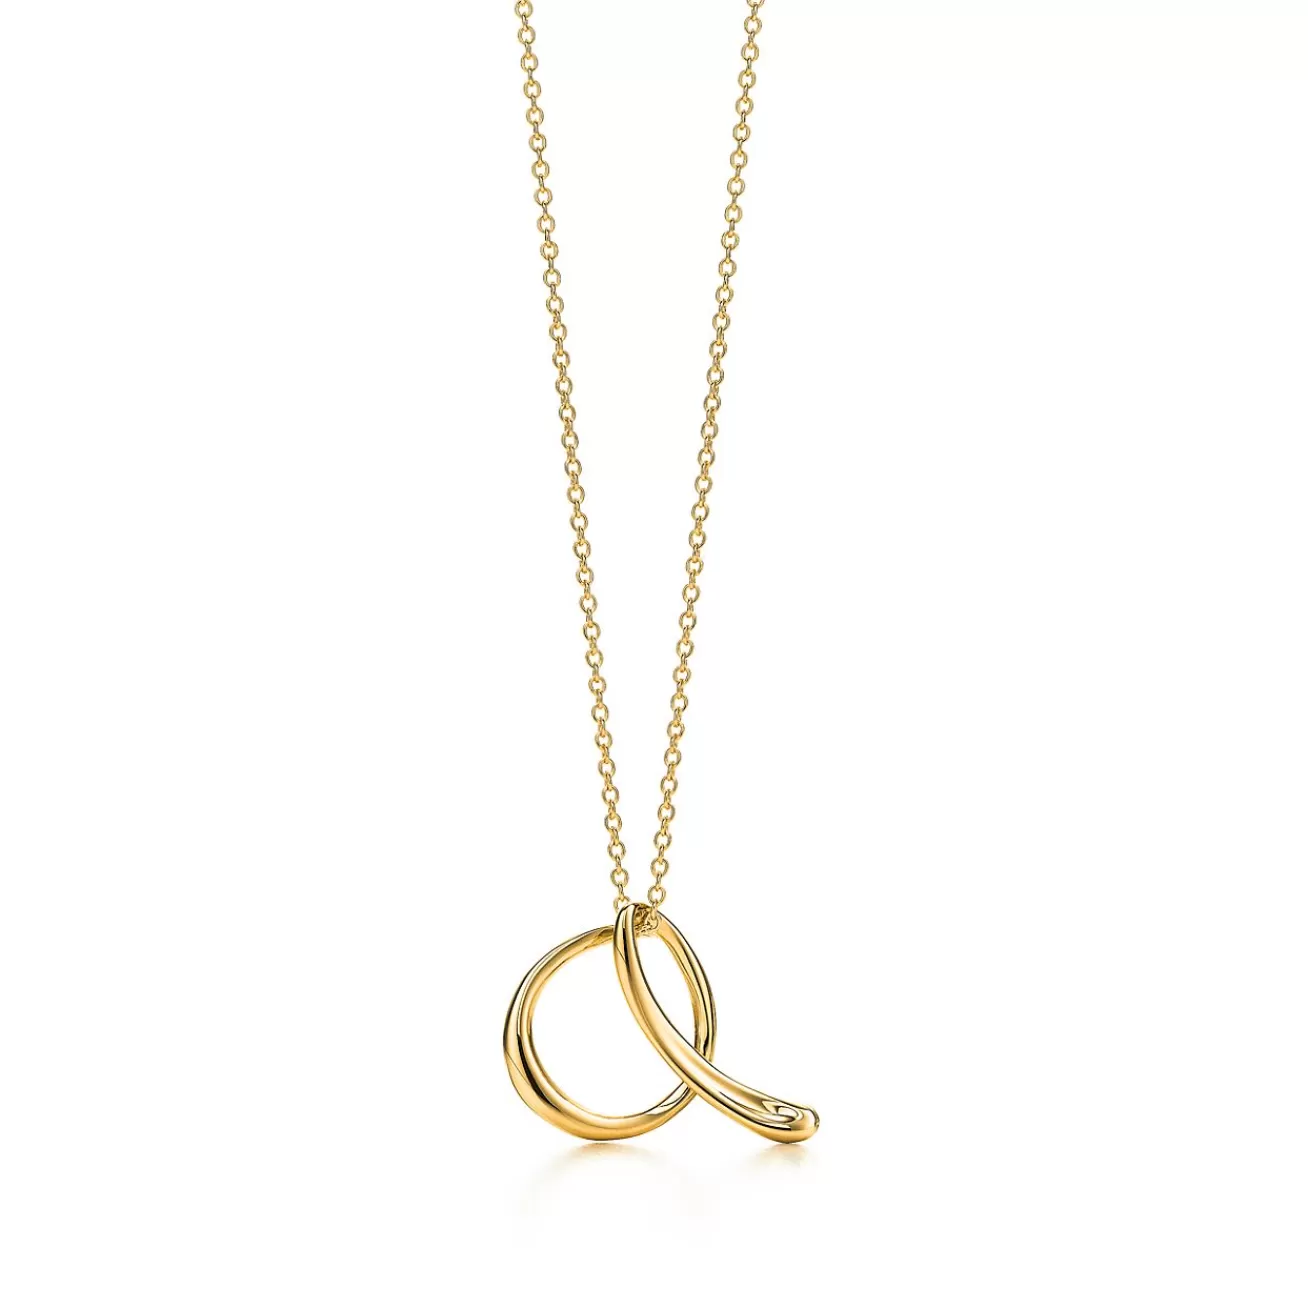 Tiffany & Co. Elsa Peretti® 18K Gold Letter "A" Pendant | ^ Necklaces & Pendants | Gifts for Her